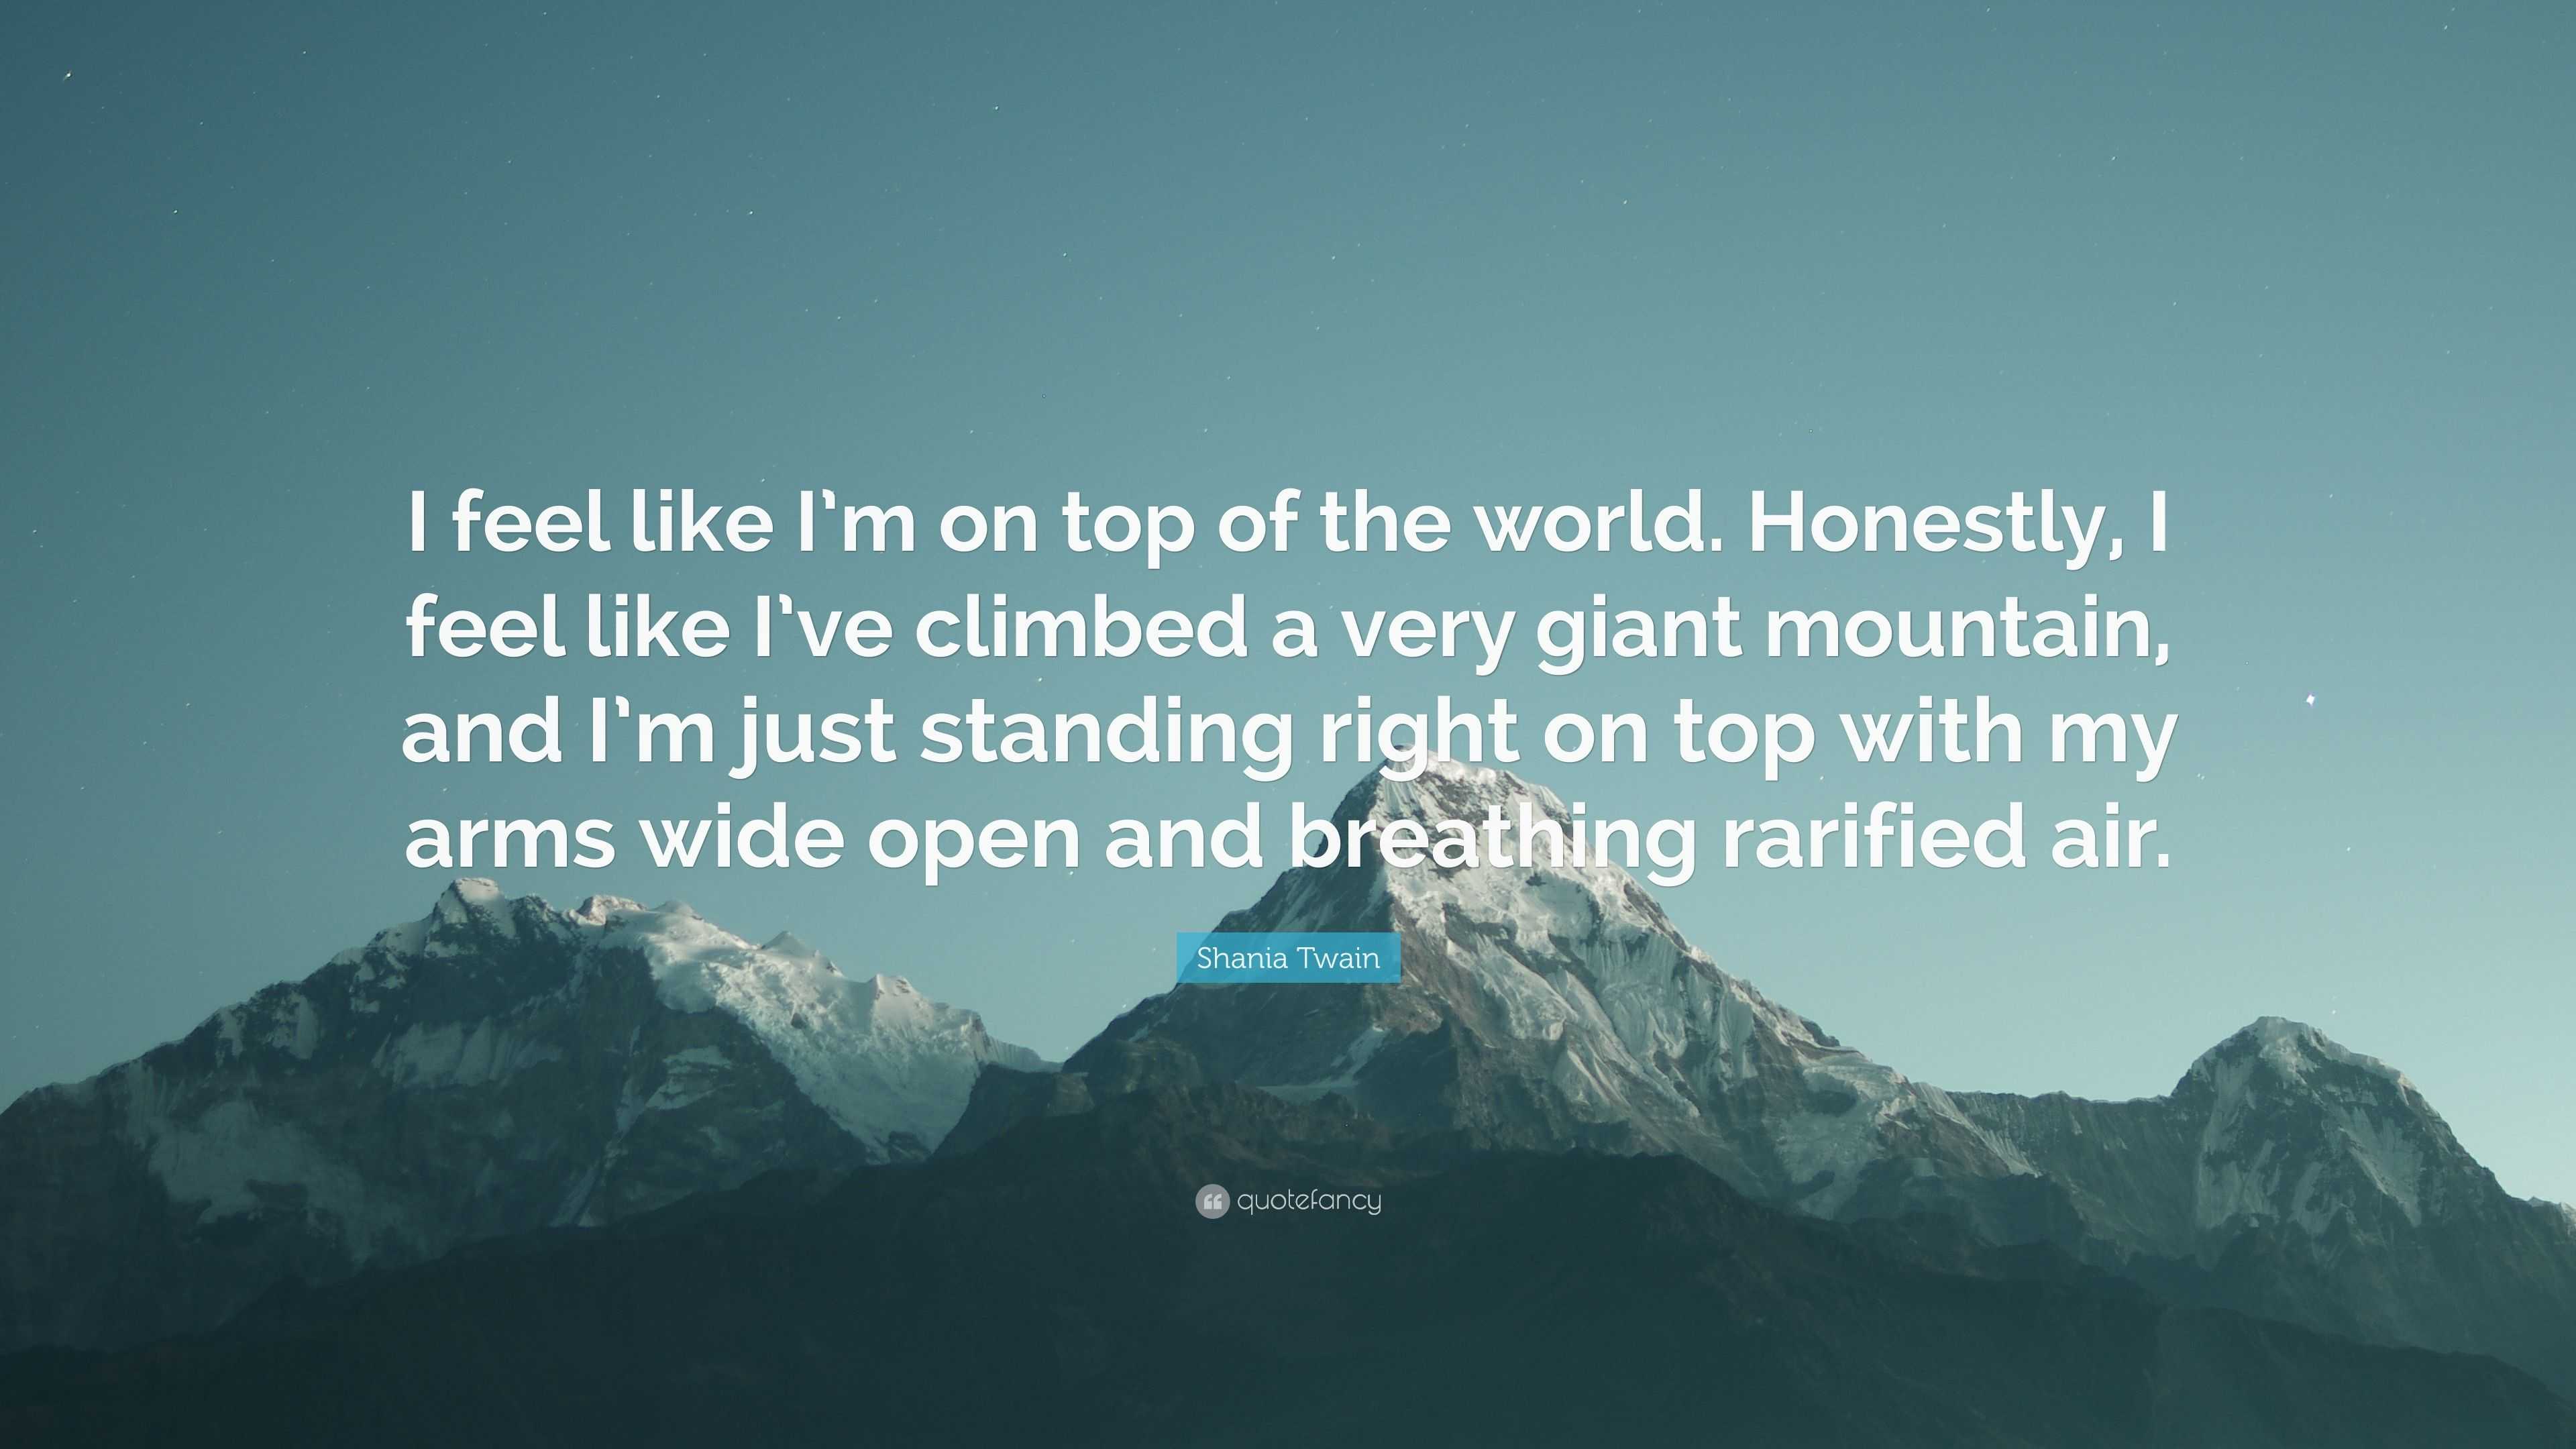 Shania Twain Quote: “I feel like I'm on top the world. Honestly, I feel like I've climbed a very giant mountain, and I'm just standing rig...”